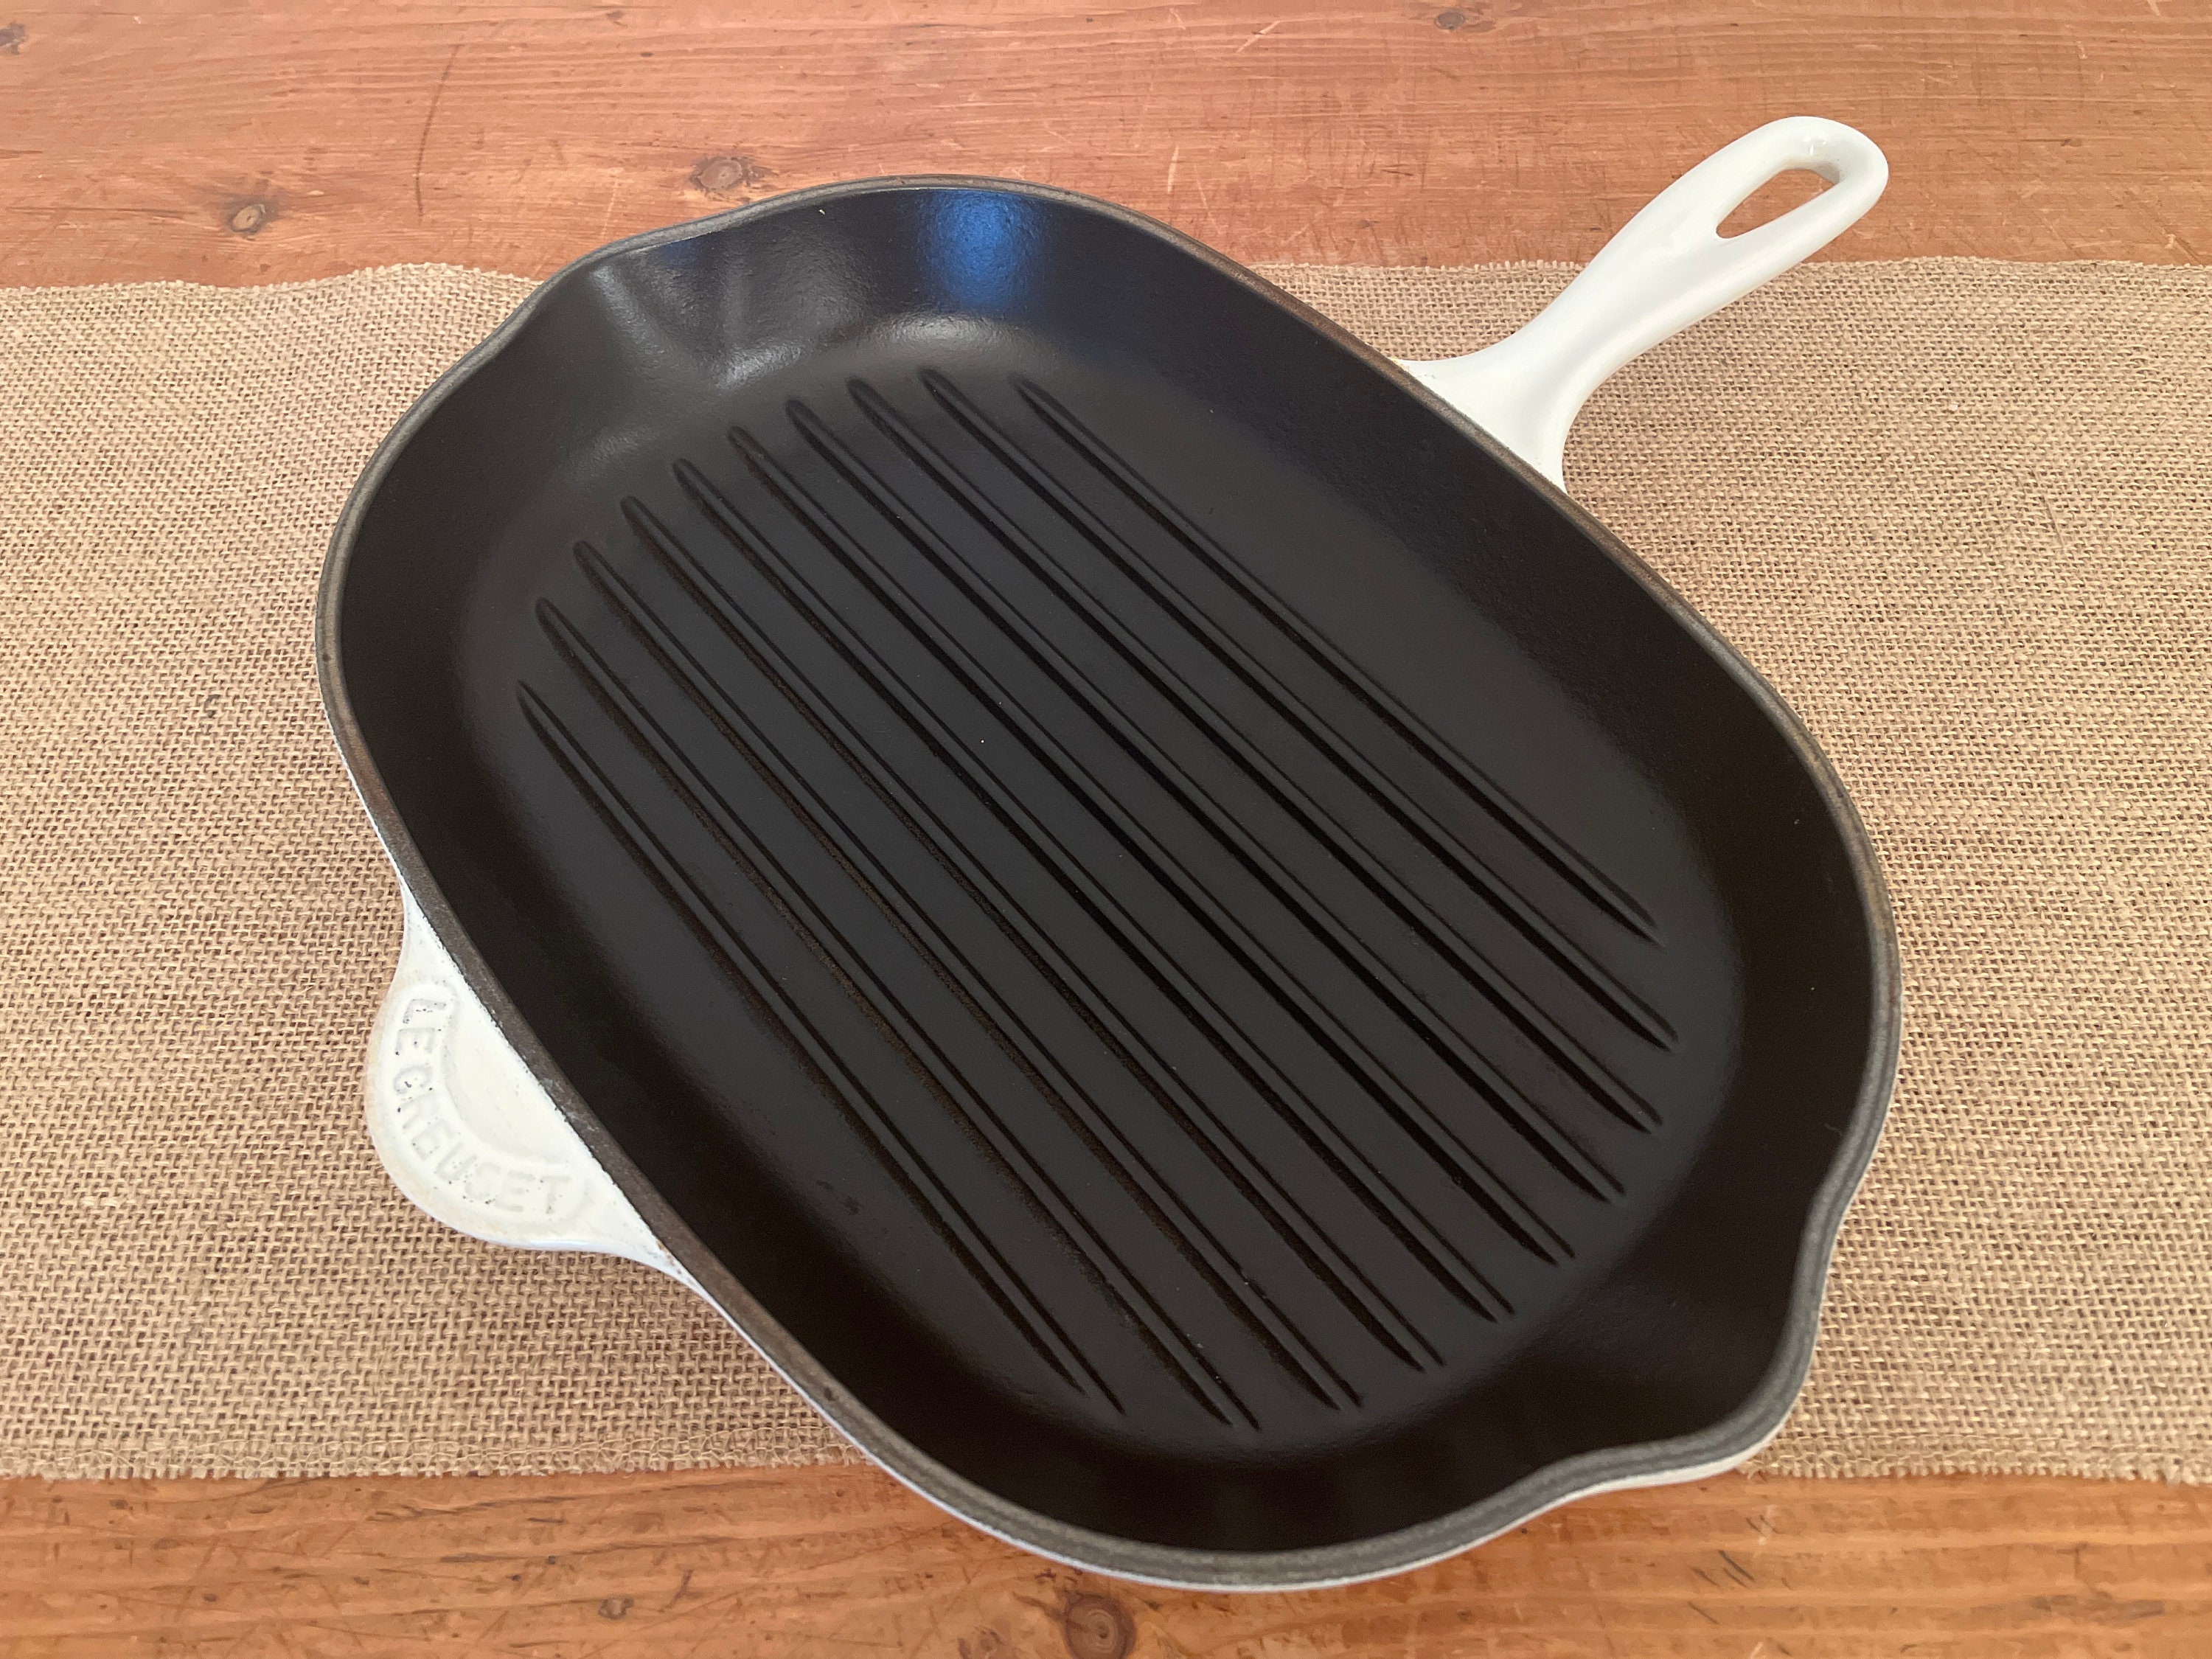 Le Creuset Square Oyster Grey Enameled Cast Iron Signature Grill Skillet -  13 1/2L x 12L x 2H